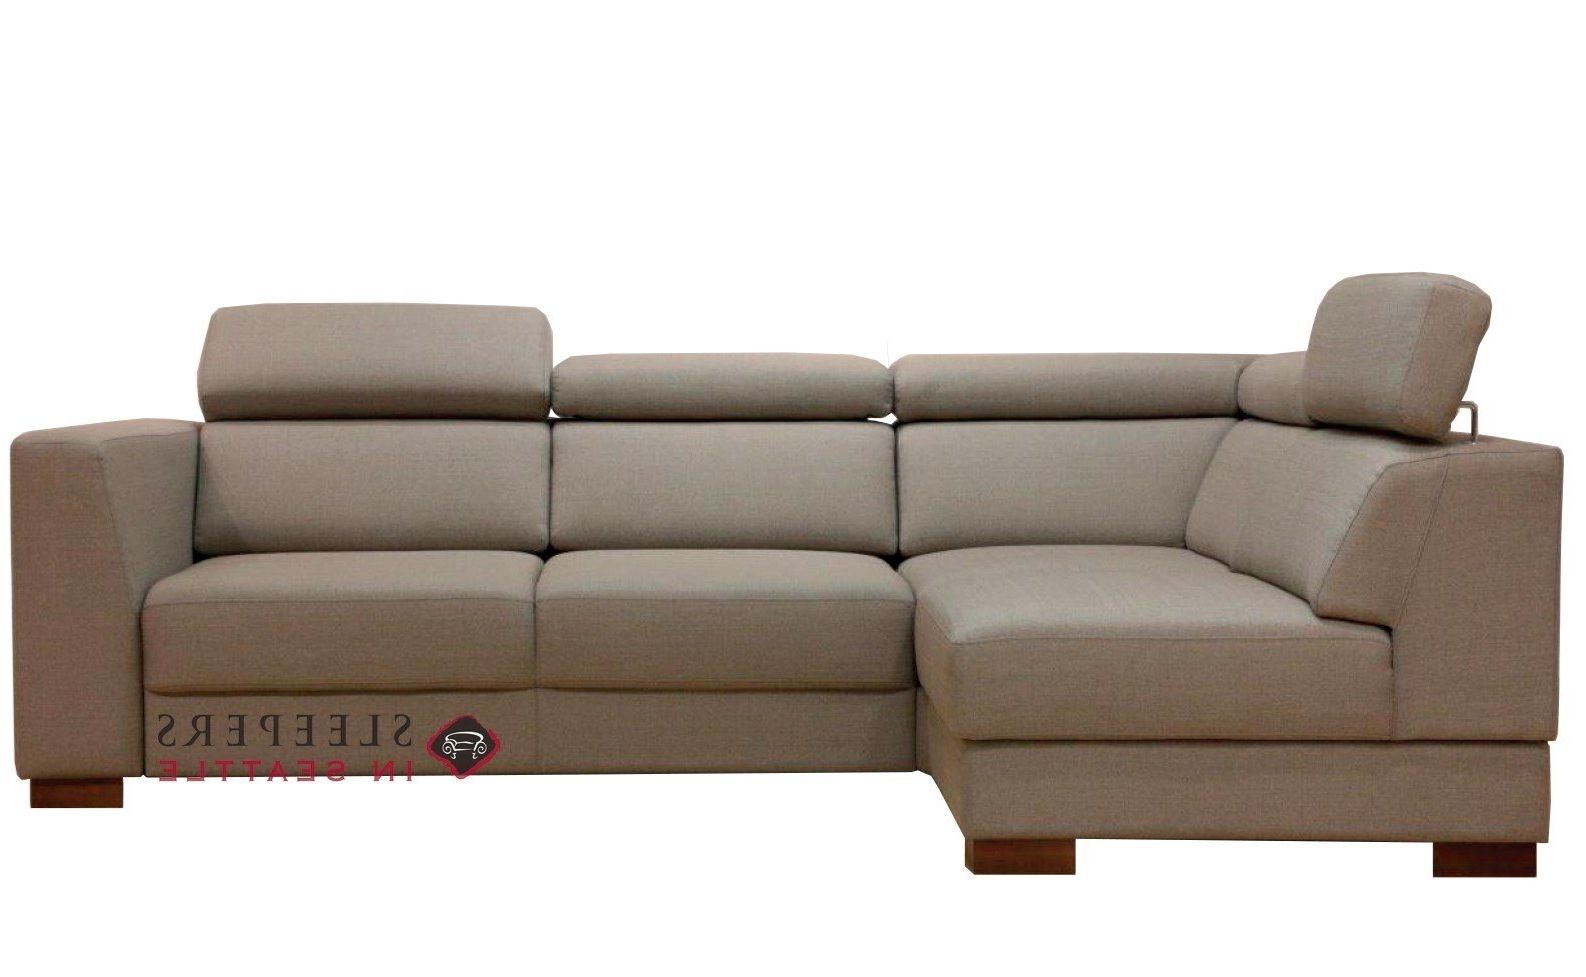 Customize And Personalize Halti Chaise Sectional Fabric Sofa Intended For Famous Chaise Sectional Sleepers (View 9 of 15)